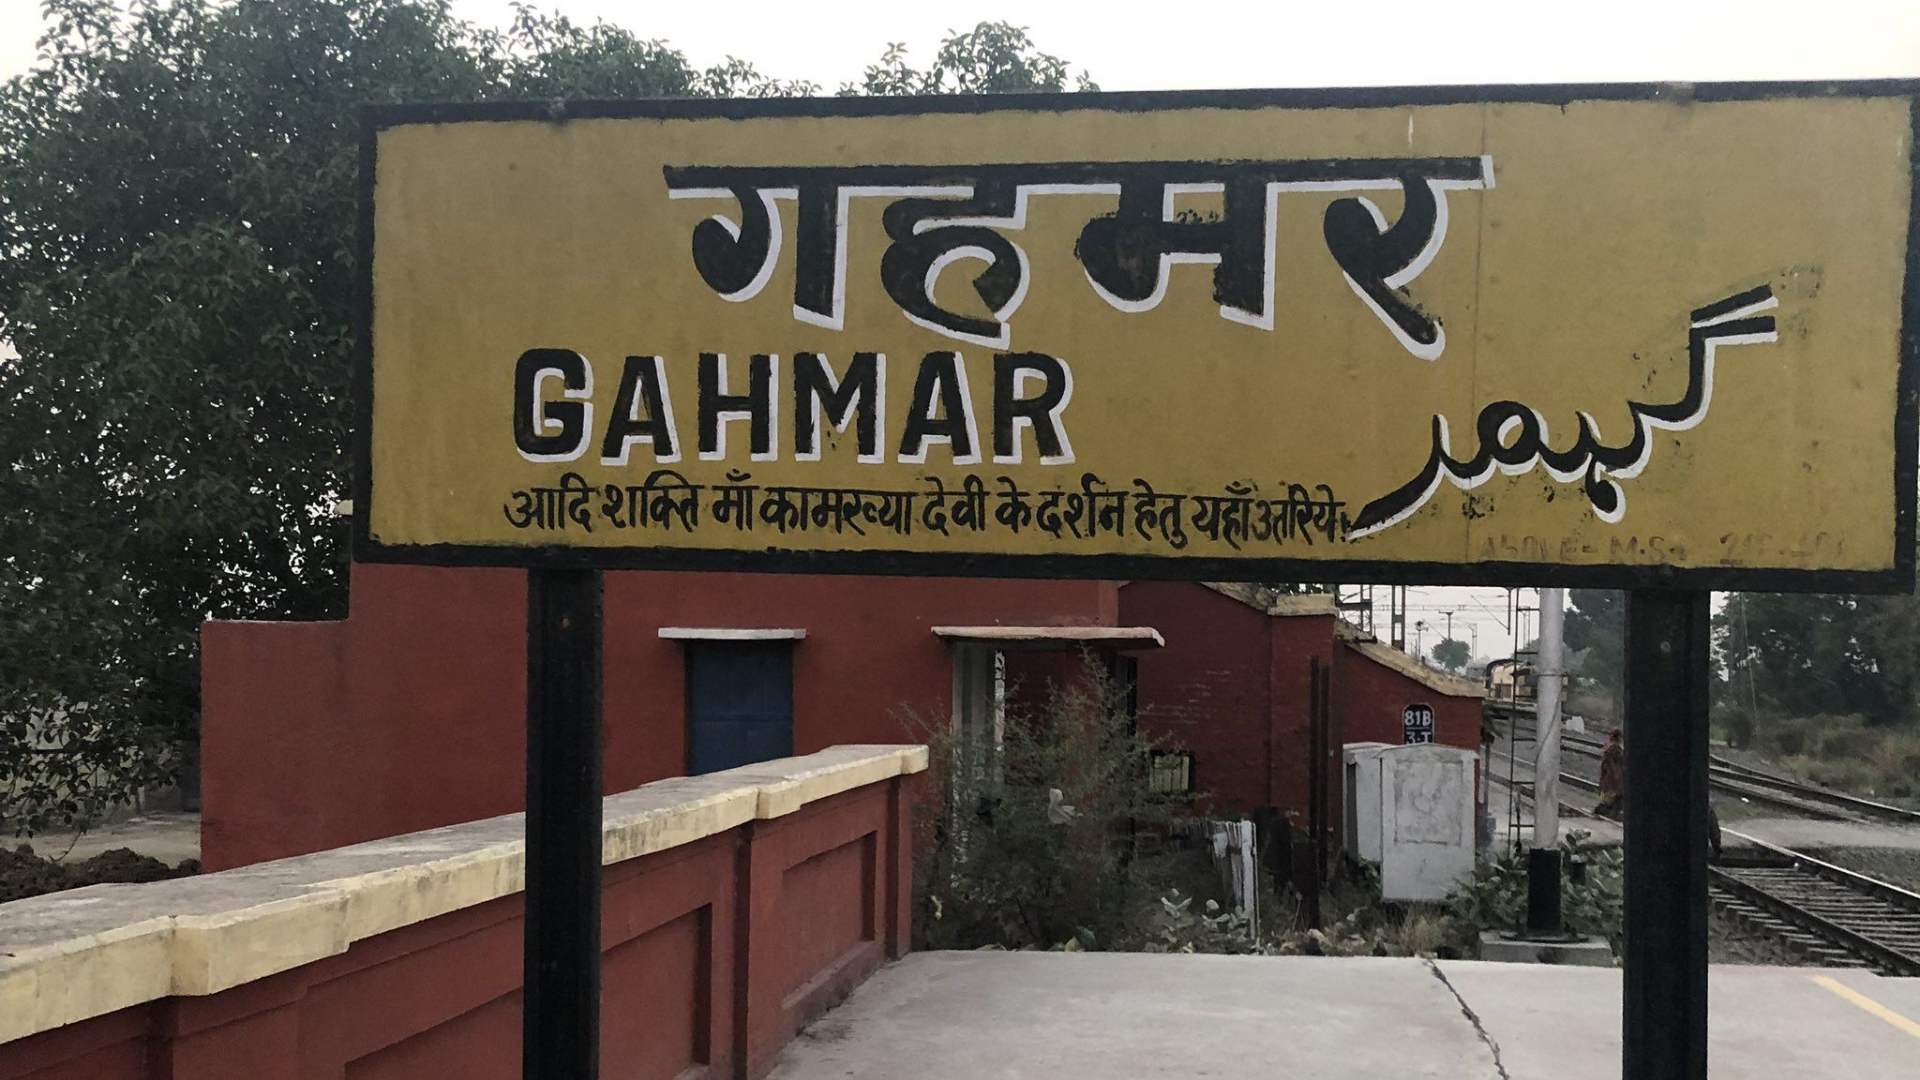 Why Is Gahmar Village Considered The Largest In India?